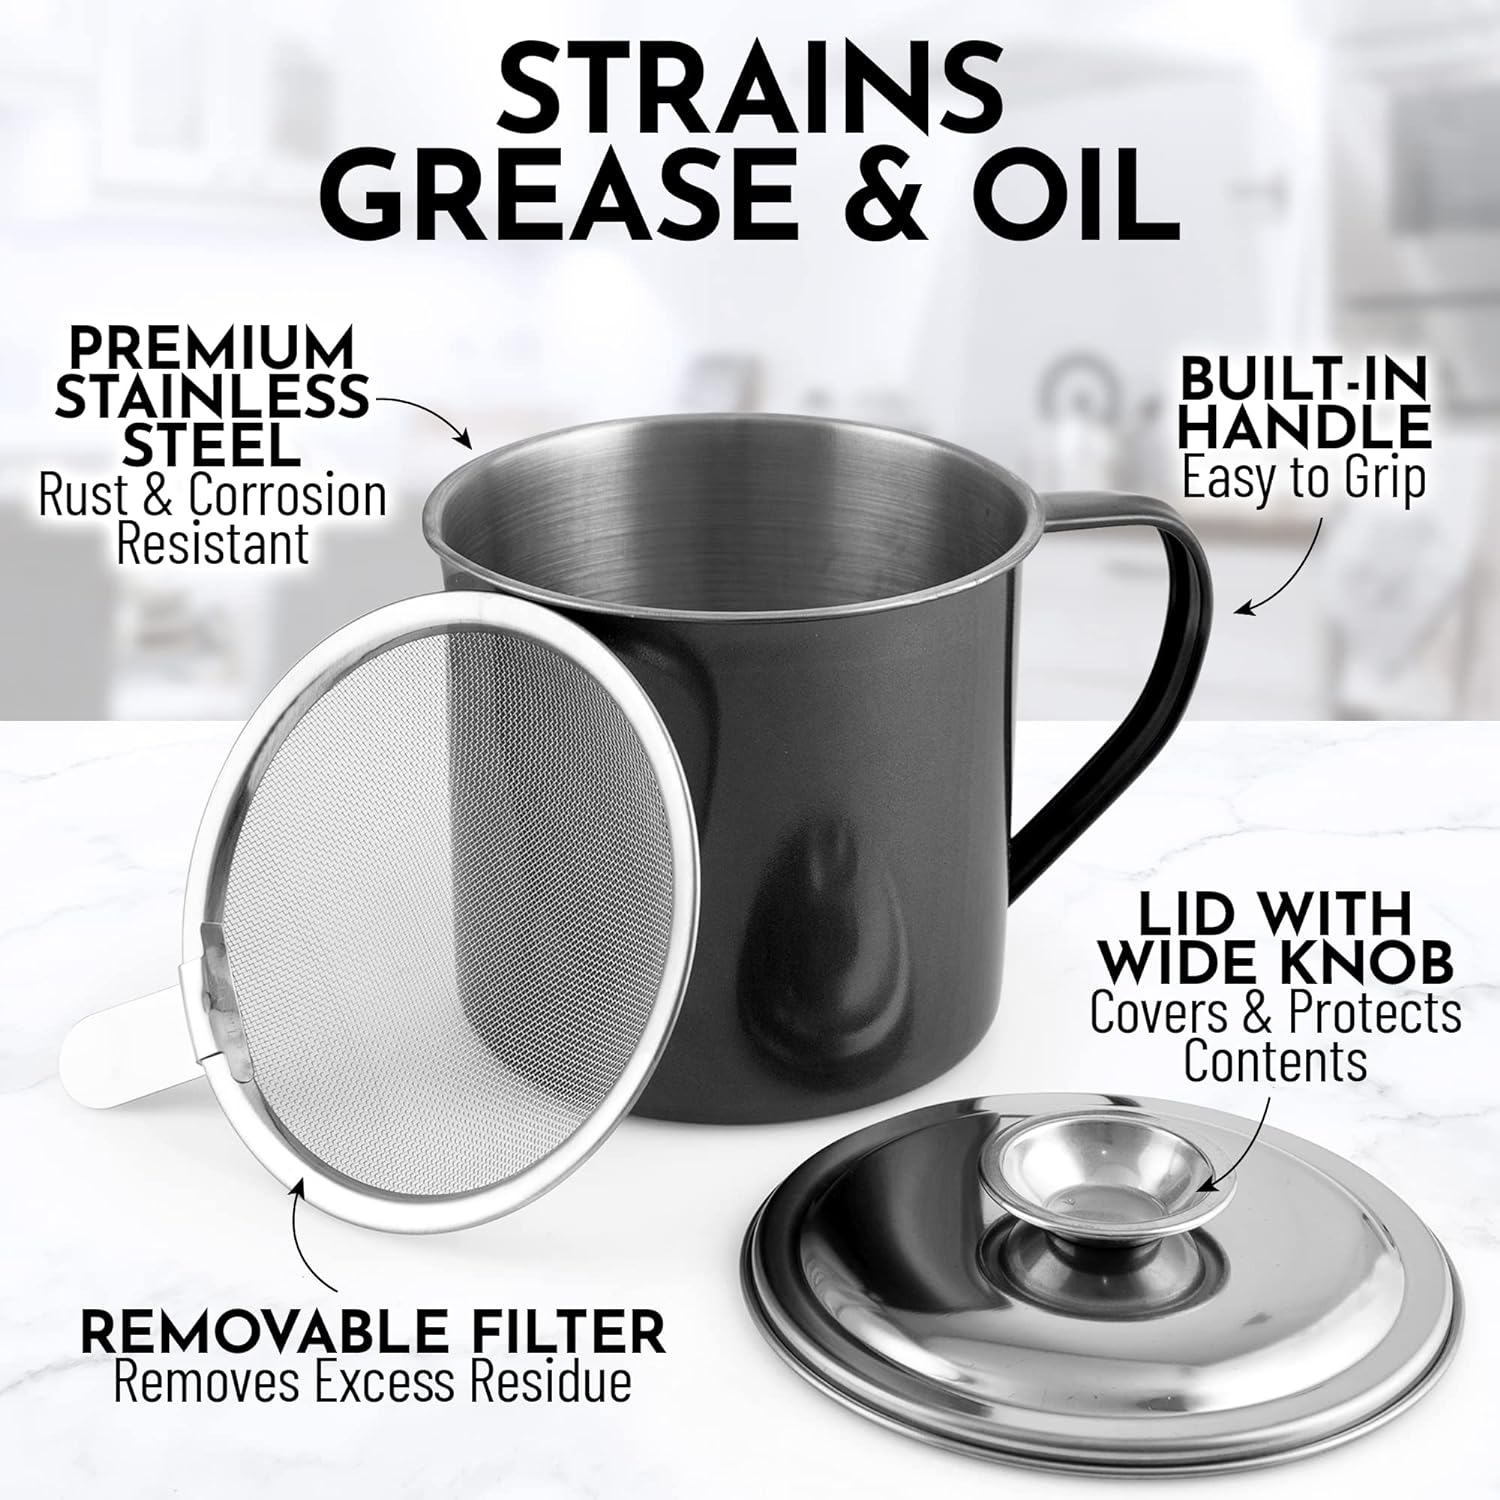 Zulay Kitchen Bacon Grease Container with Strainer - Black